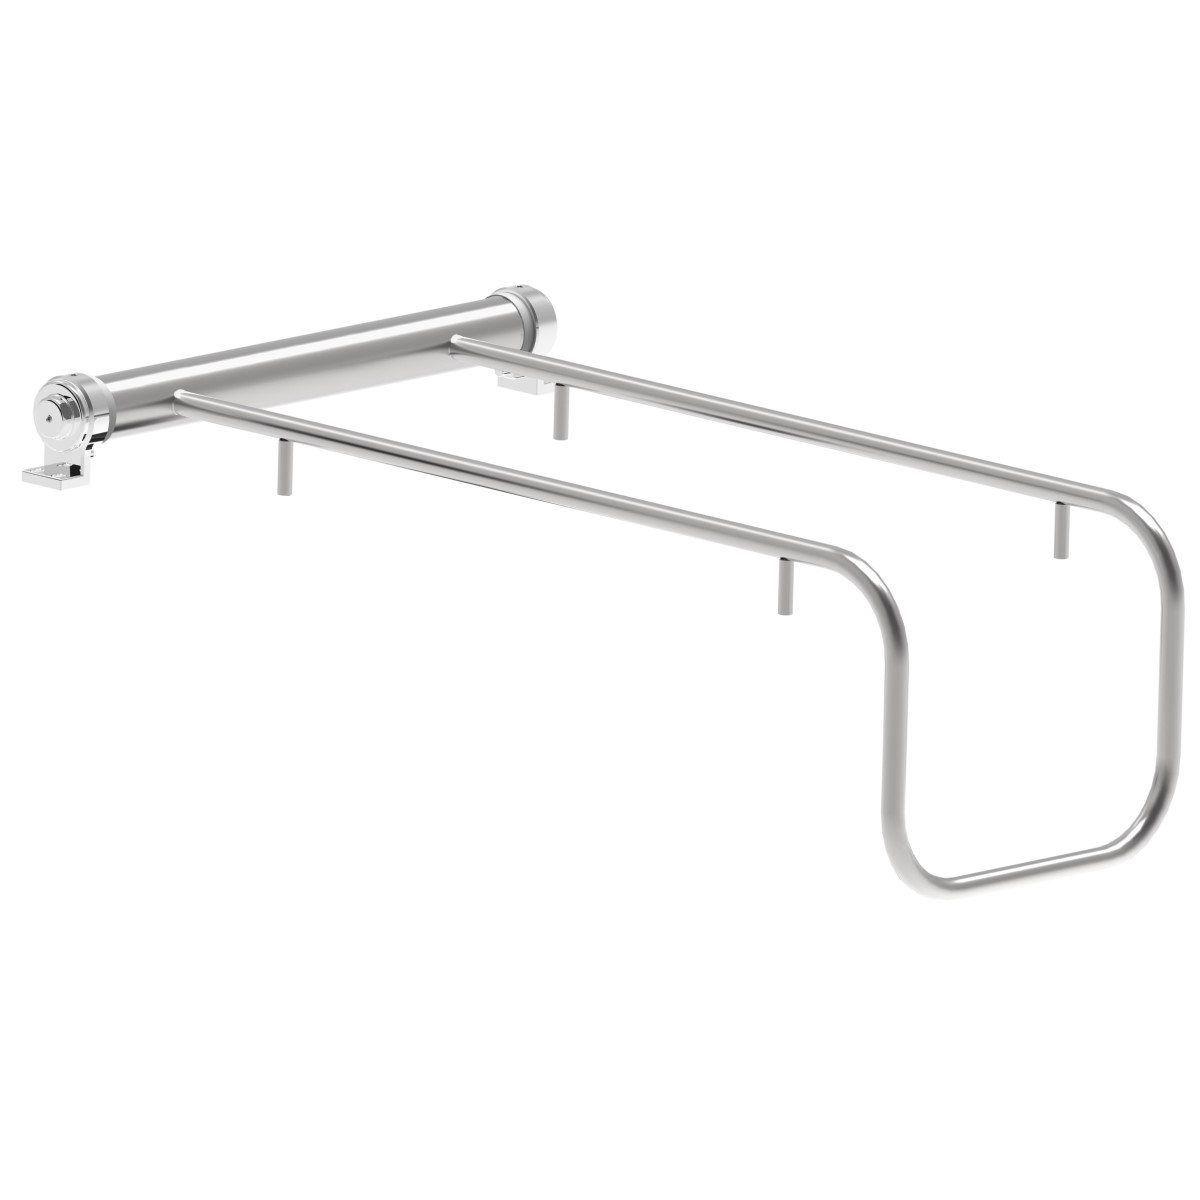 Hinge for braziers and fryers